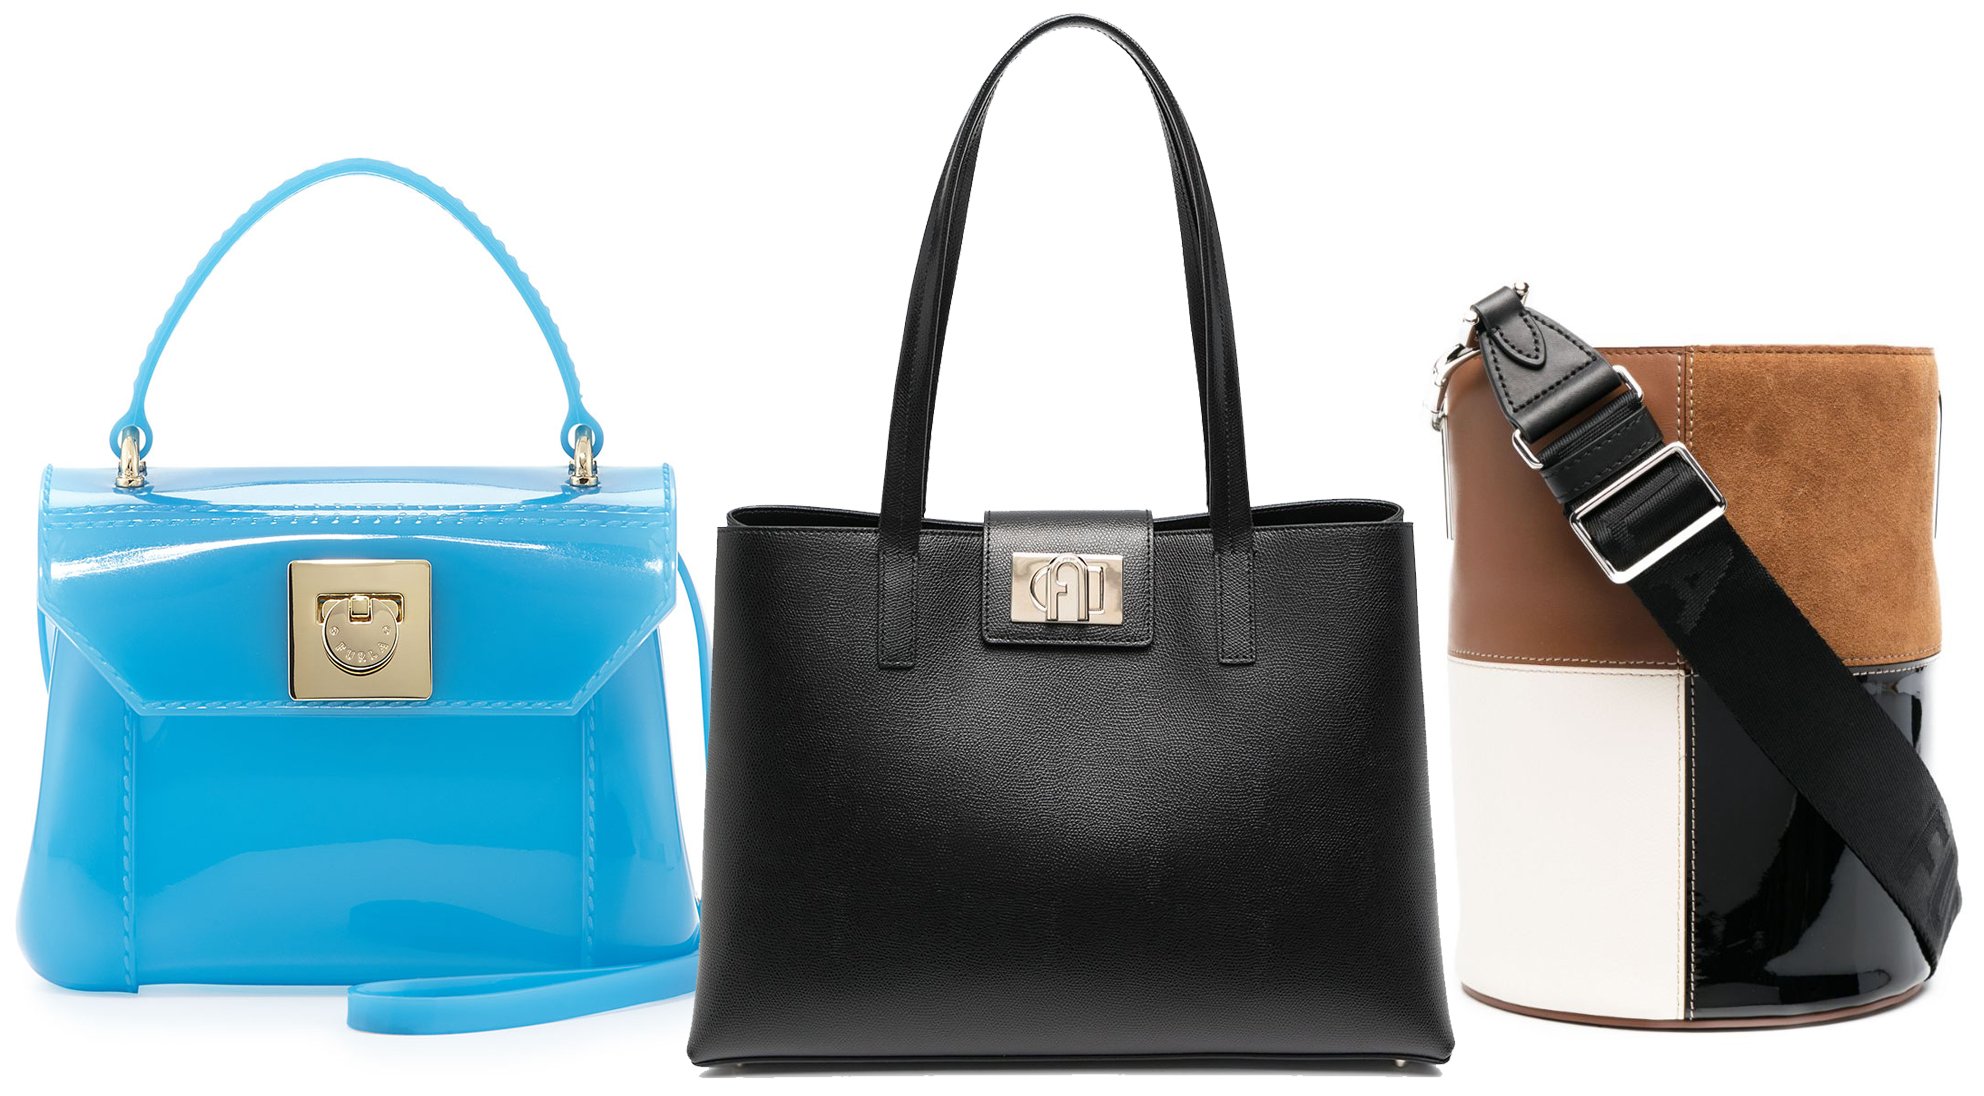 Aside from its PVC bags, Furla also has an array of bags made from genuine leather